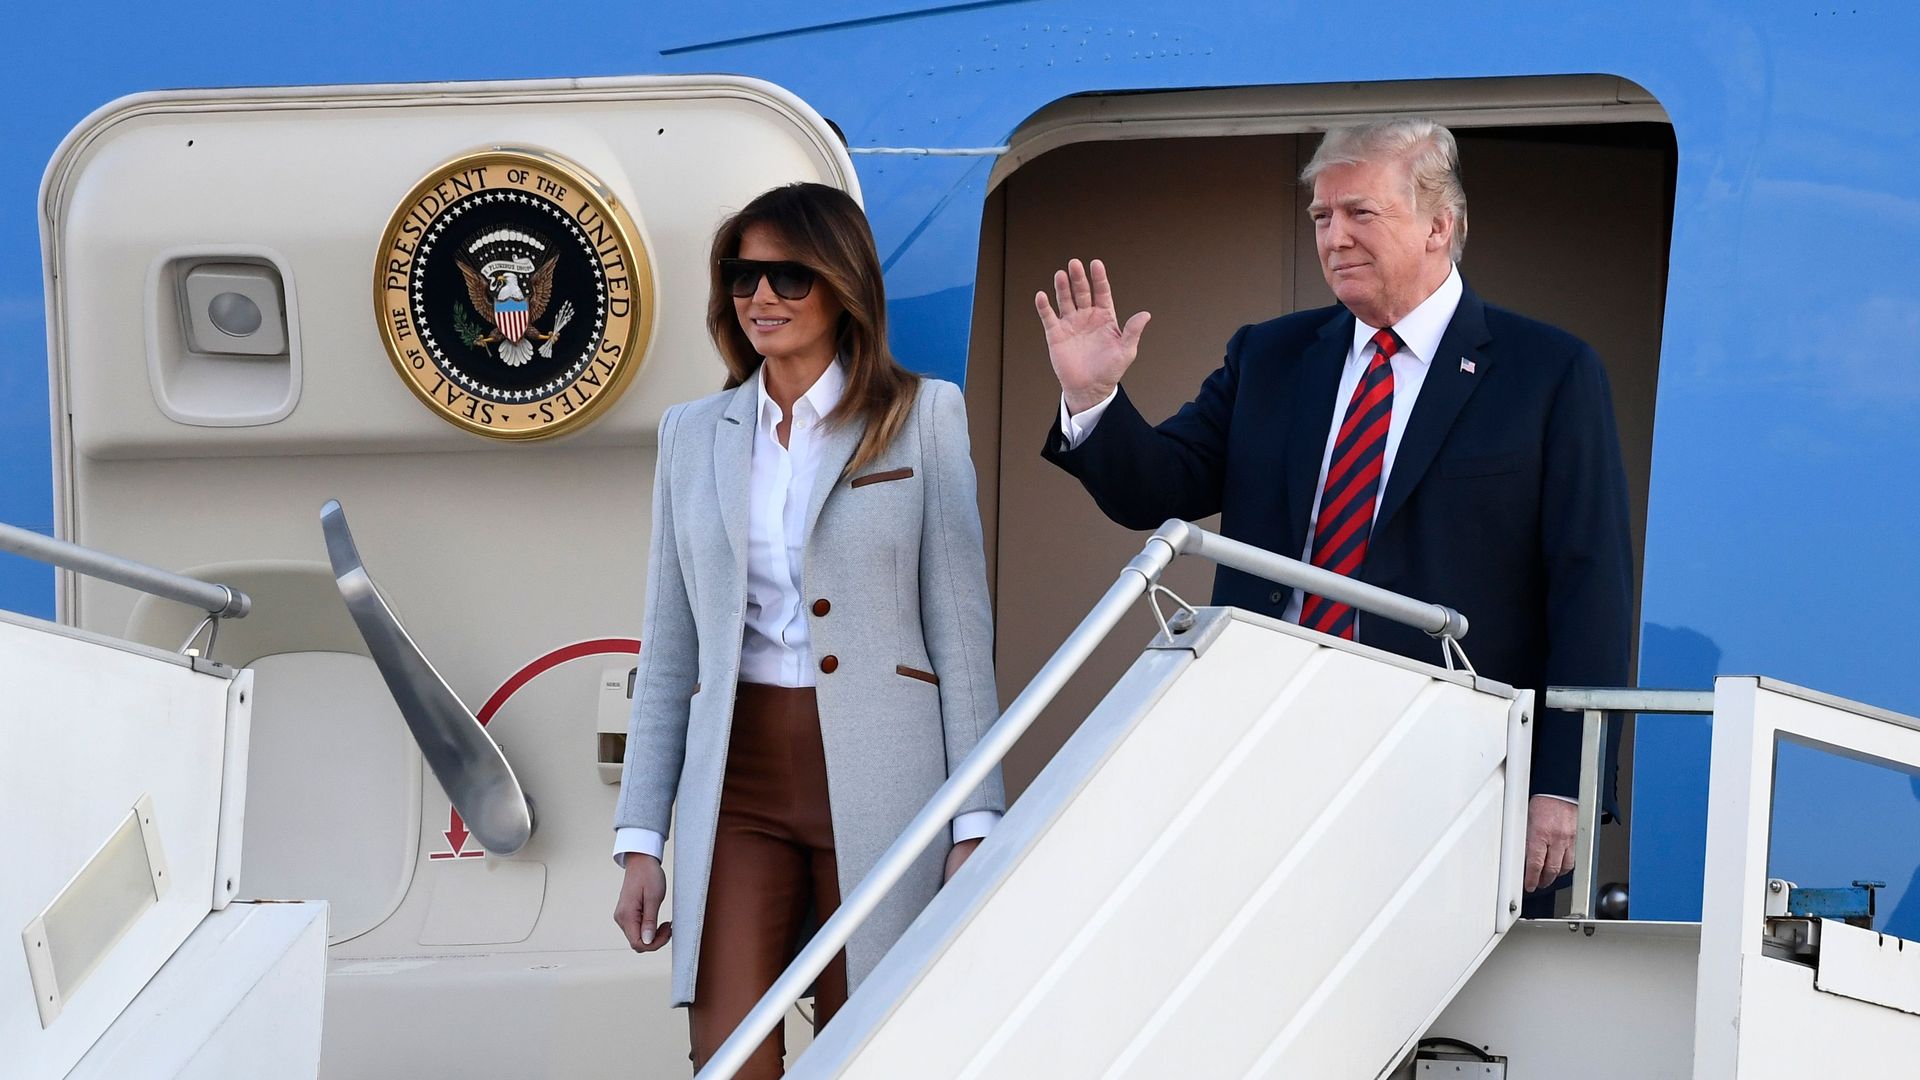 Melania and Trump on Air Force One staircase waving.